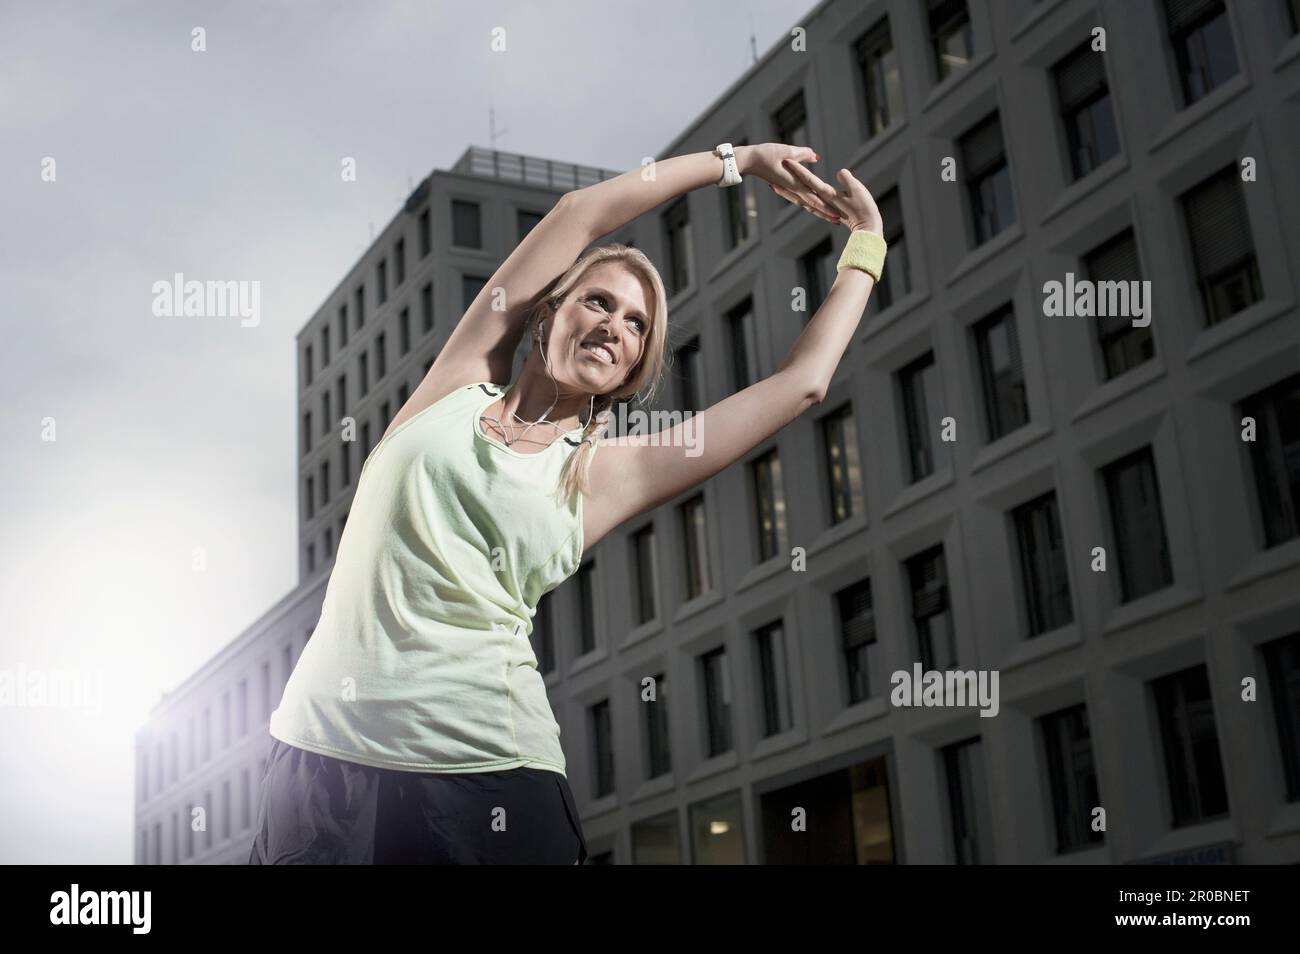 Mid adult woman stretching her body and listening to music, Bavaria, Germany Stock Photo